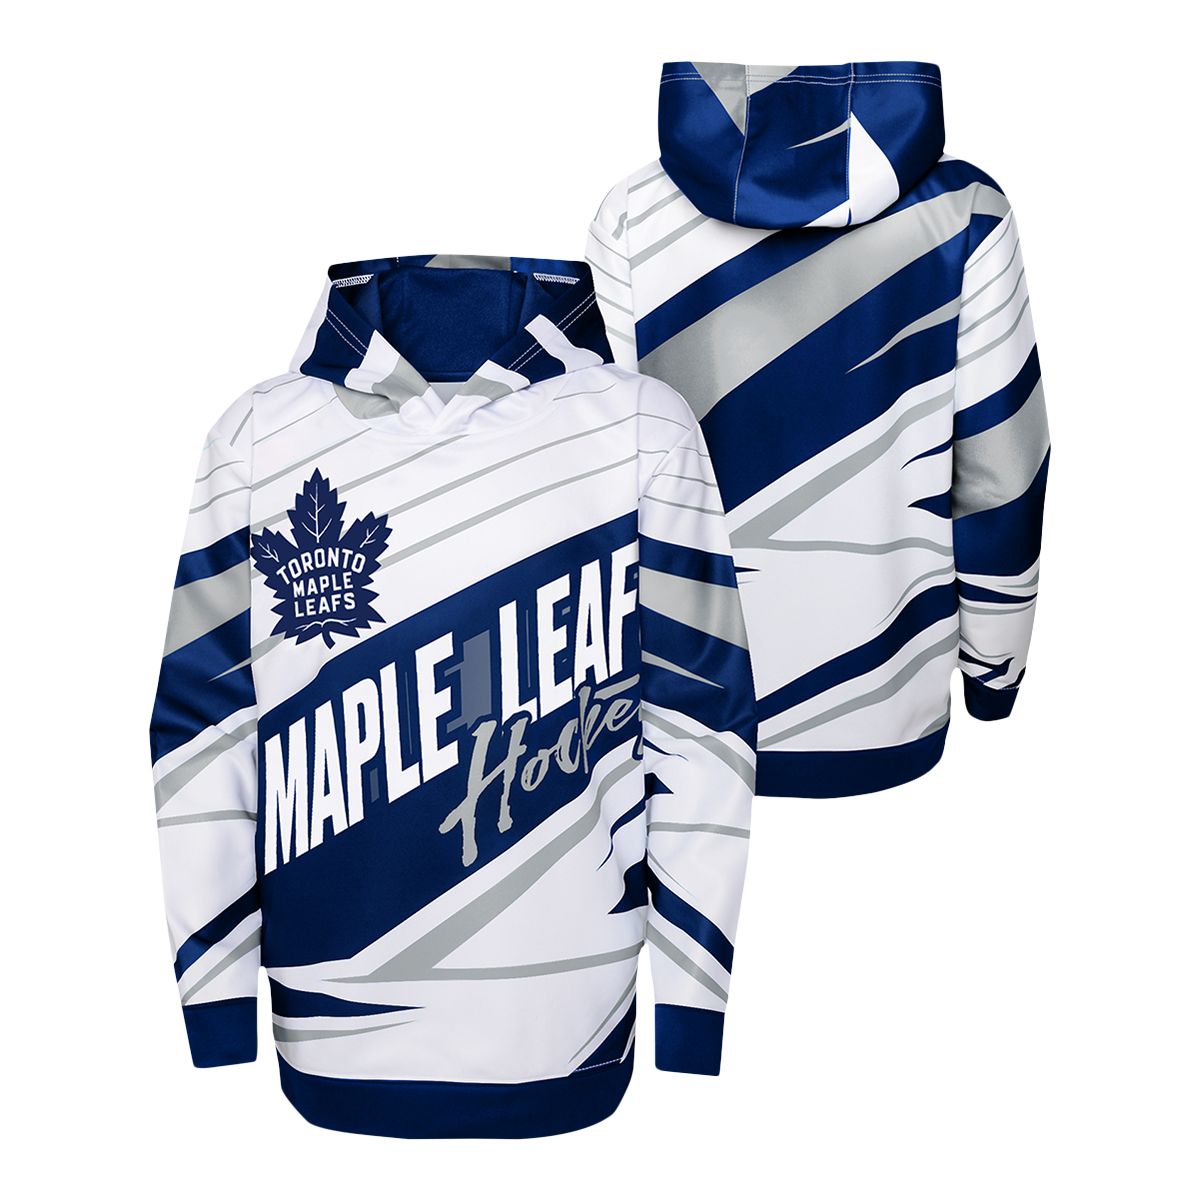 NHL: Maple Leafs relax dress code for players